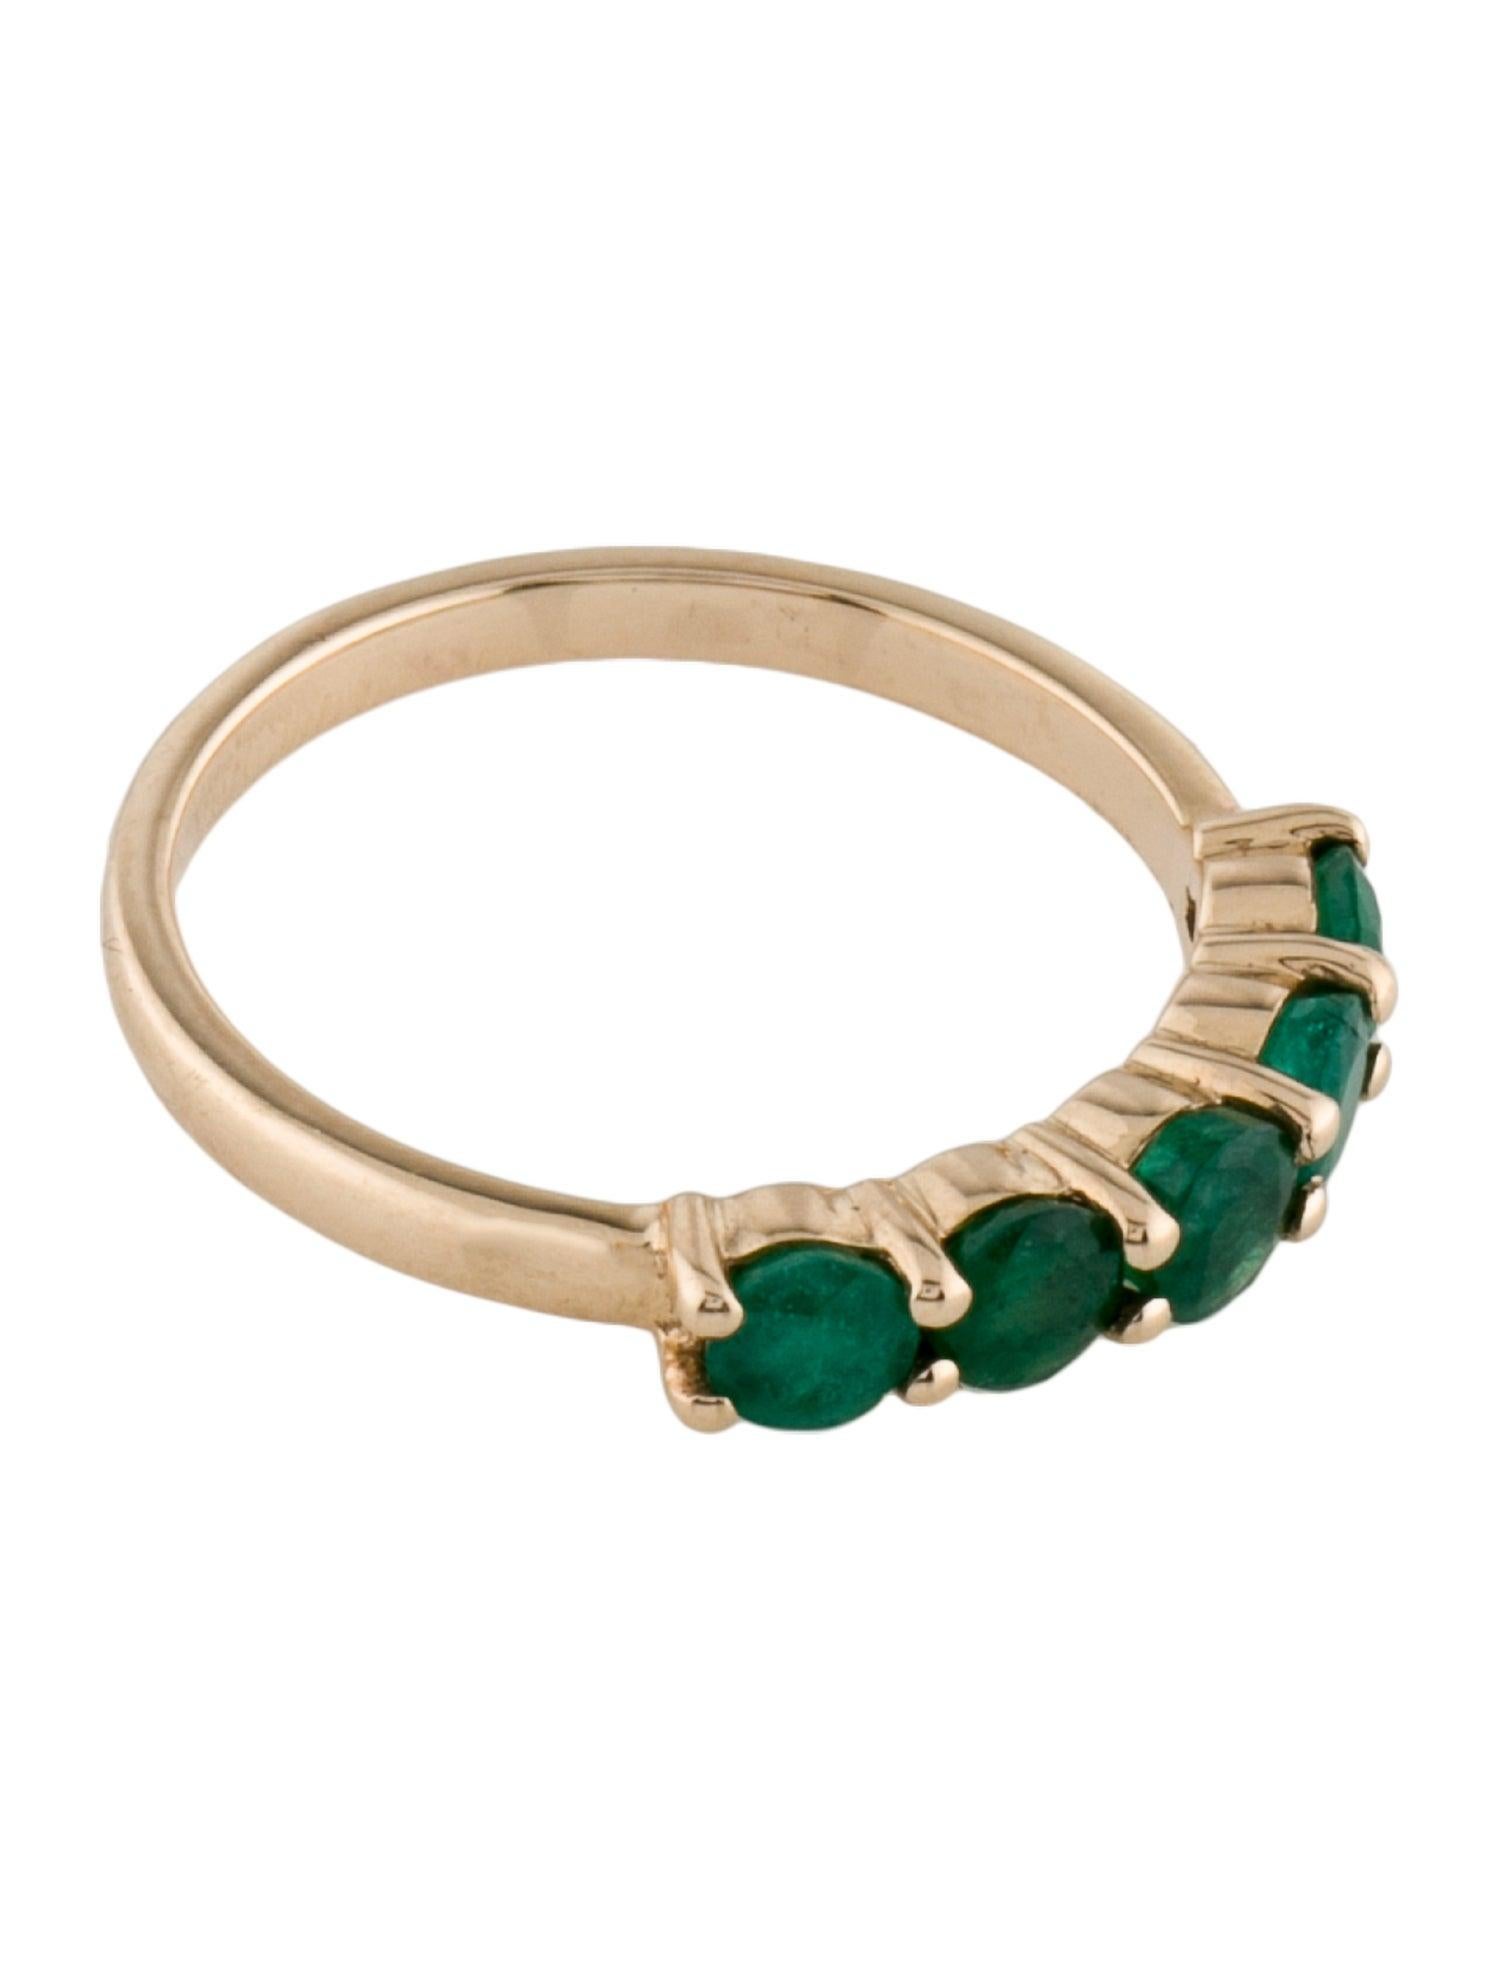 Immerse yourself in the allure of nature with our Forest Ferns Emerald Ring from the renowned Jeweltique collection. This exquisite ring is a testament to the natural beauty and elegance that surrounds us, capturing the essence of lush, verdant